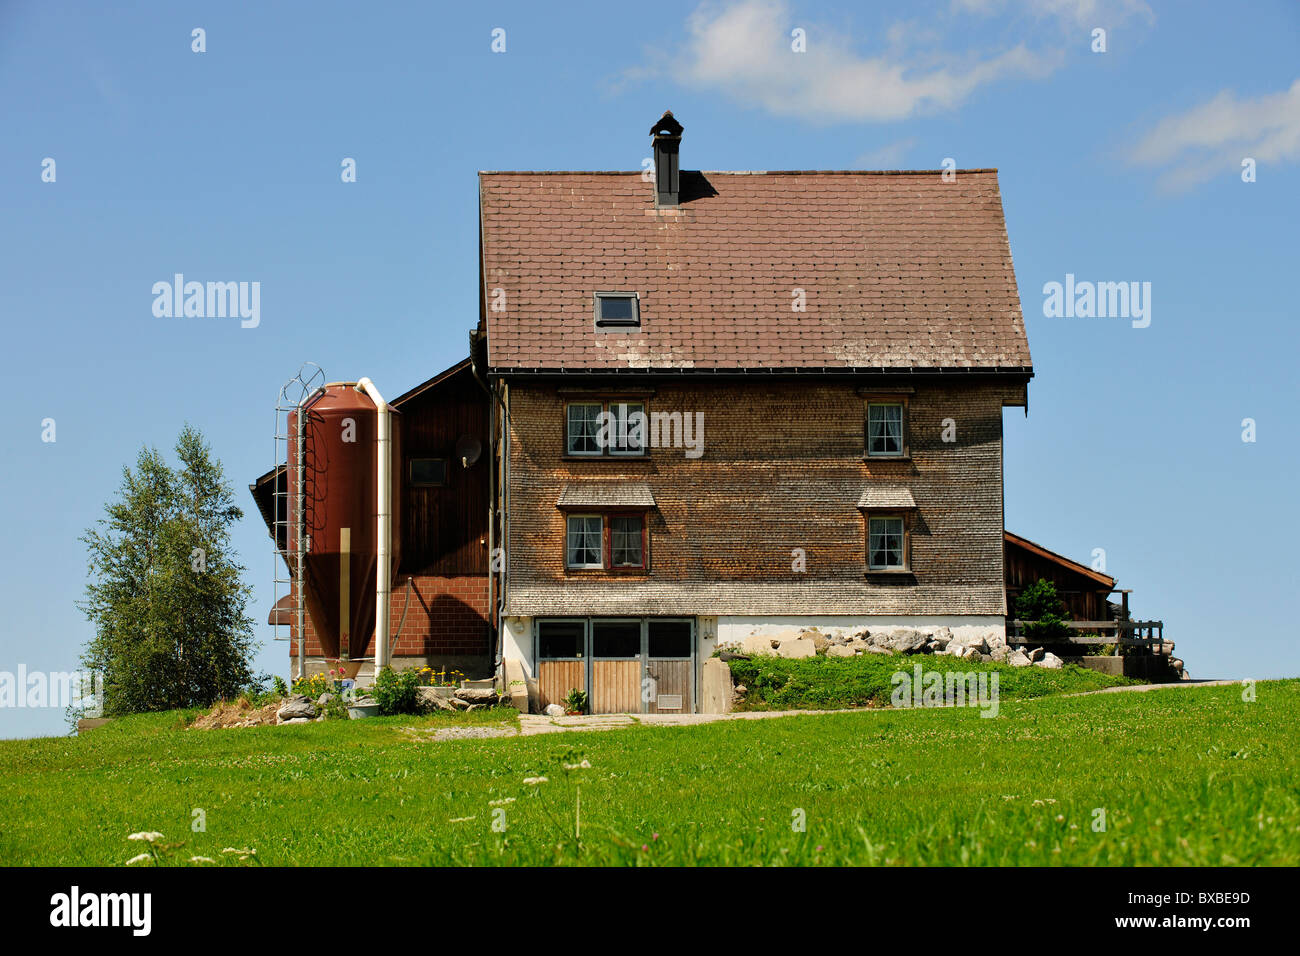 Farm house in the canton of Appenzell, Switzerland, Europe Stock Photo